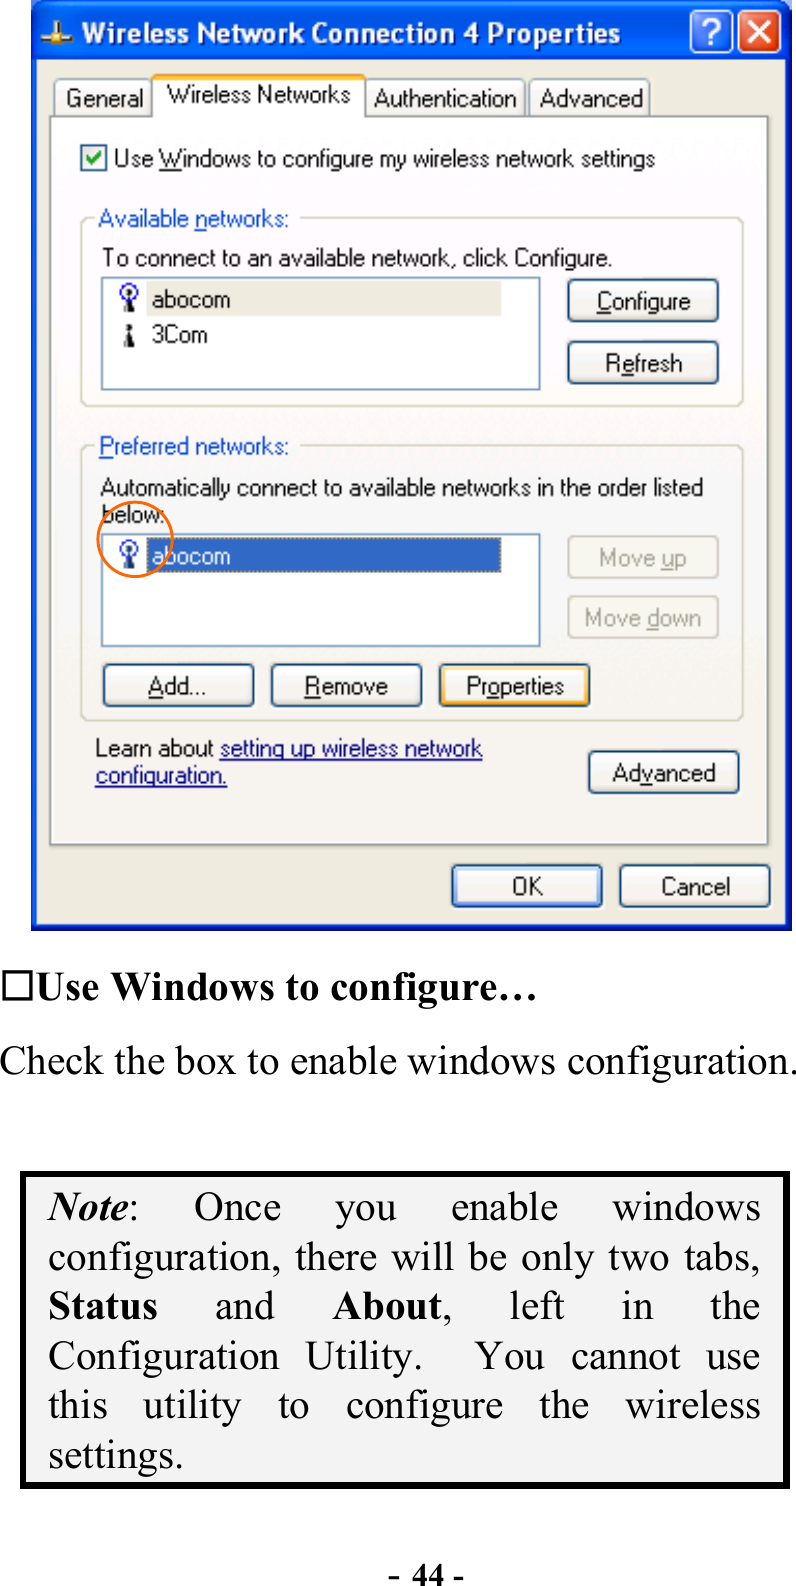  - 44 -  Use Windows to configure… Check the box to enable windows configuration.      Note: Once you enable windows configuration, there will be only two tabs, Status and About, left in the Configuration Utility.  You cannot use this utility to configure the wireless settings. 